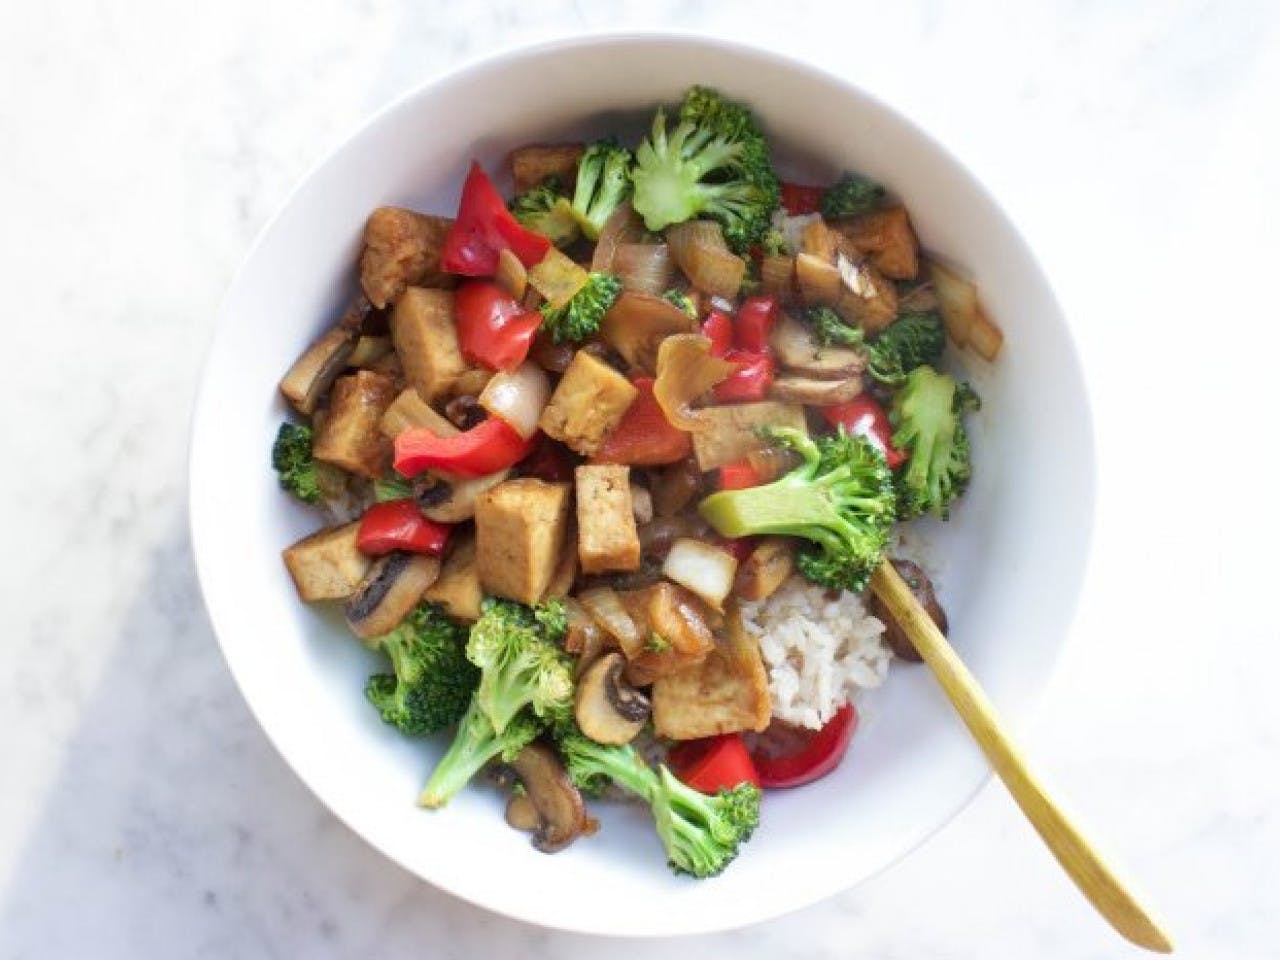 Tofu stir fry with broccoli and pointed pepper